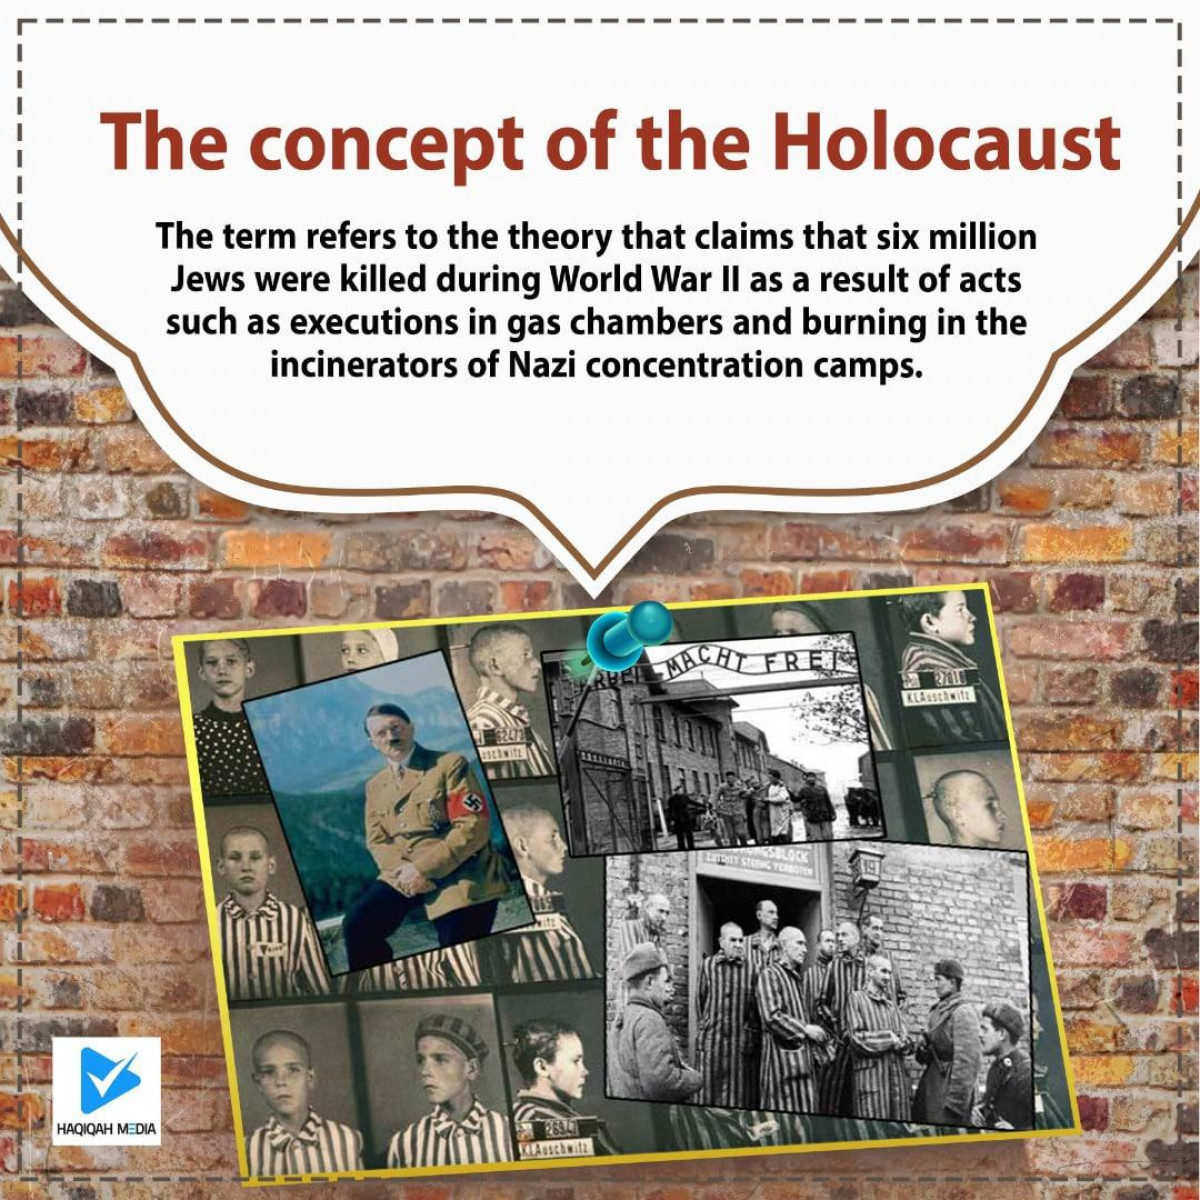 The concept of the Holocaust